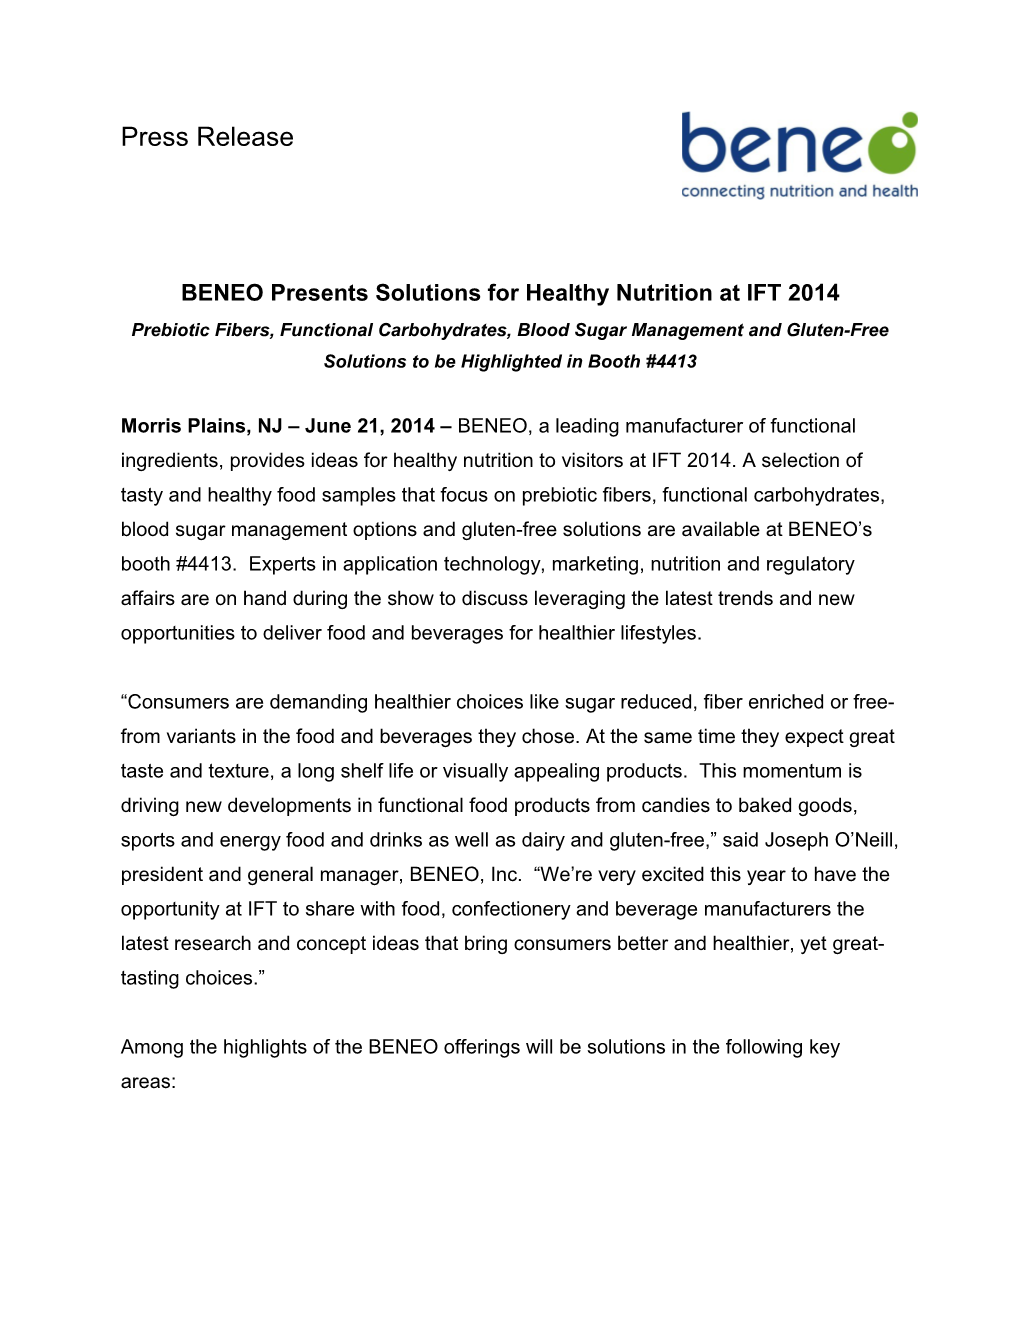 BENEO Presents Solutions for Healthy Nutritionat IFT 2014